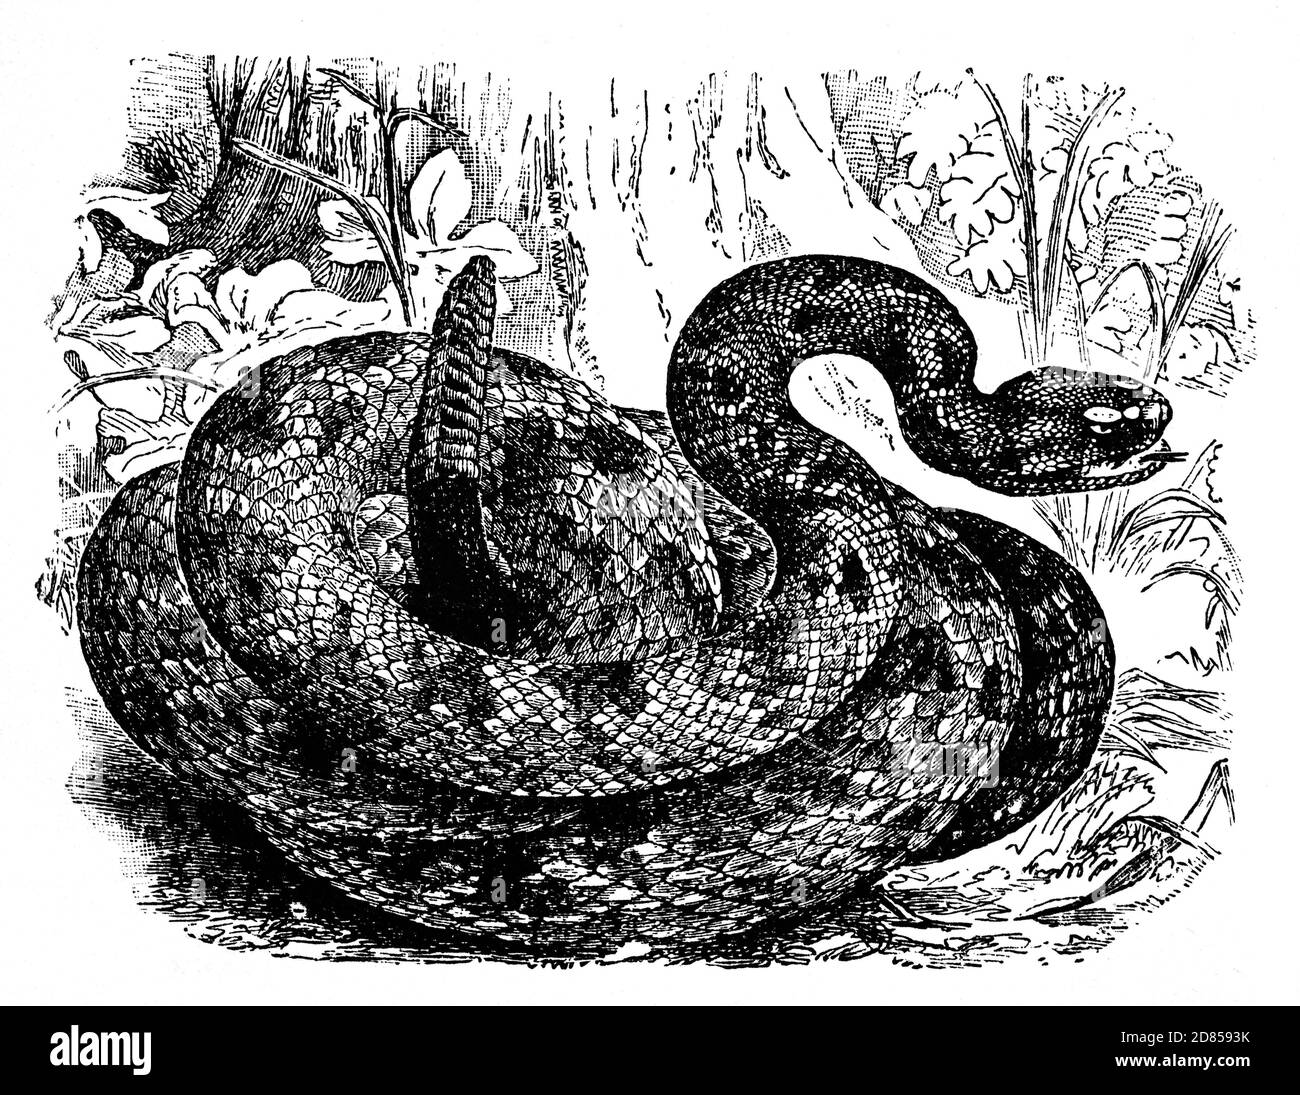 A 19th Century illustration of a rattlesnake, a group of venomous snakes of the genera Crotalus and Sistrurus of the subfamily Crotalinae (the pit vipers). The 36 known species of rattlesnakes are native to the Americas, ranging from Canada to central Argentina. They received their name from the rattle located at the end of their tails, used to deter predators or serves as a warning to passers-by. Stock Photo